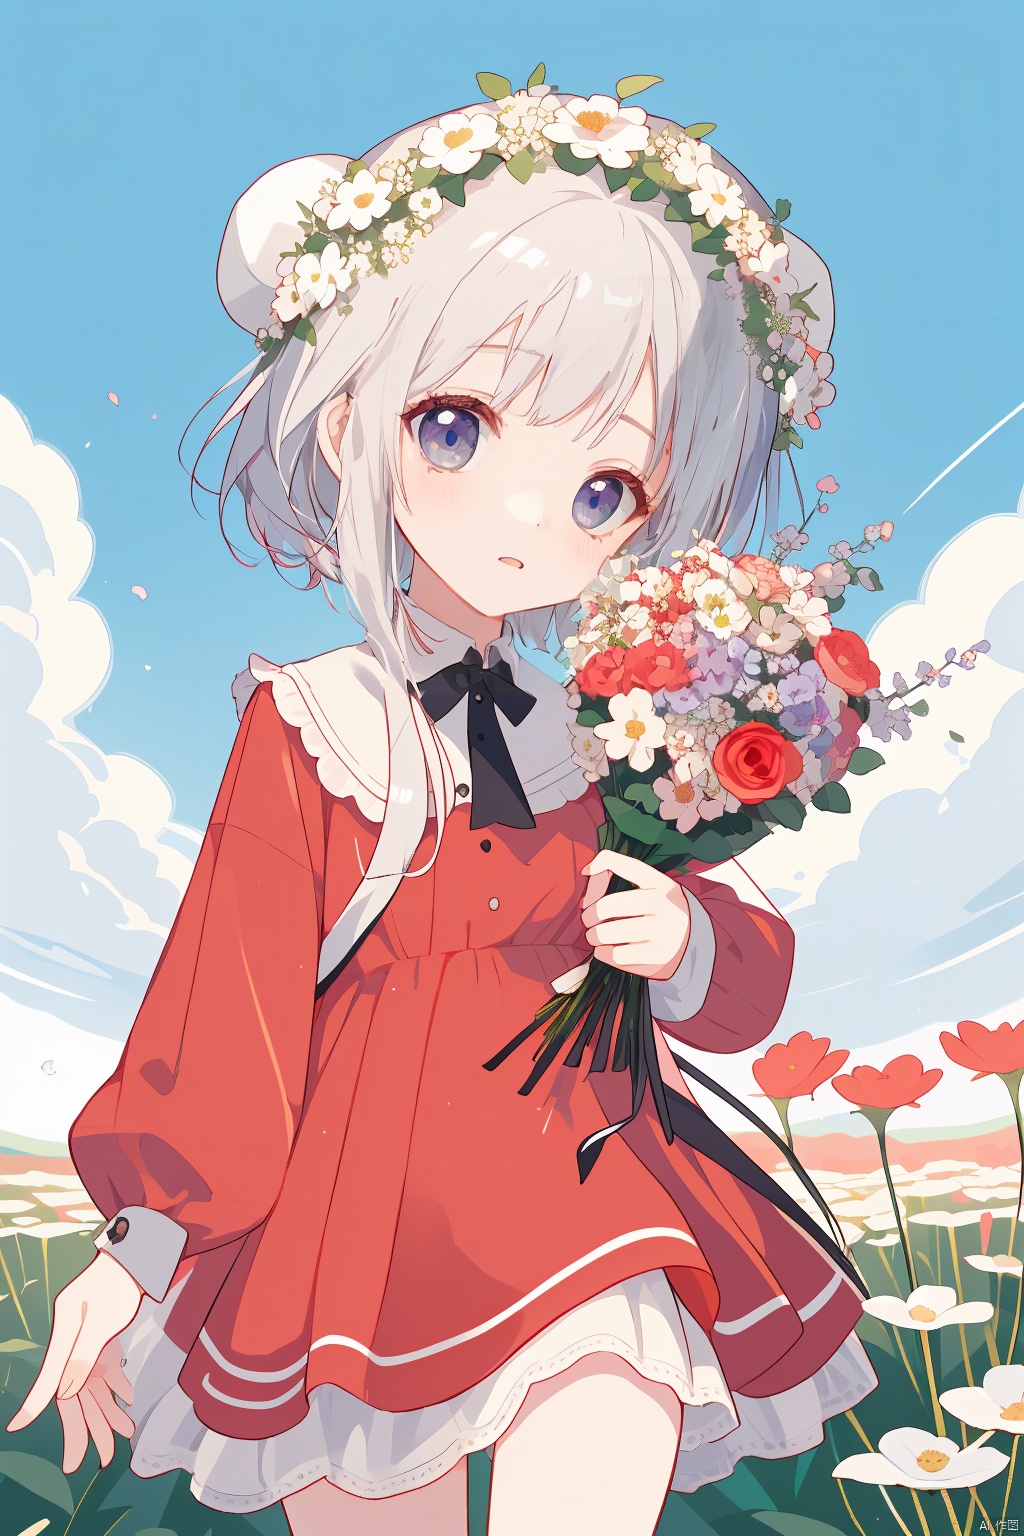 1 girl, cute, cute, in the flower field, holding a bouquet of flowers in her hand, wearing a red dress, wearing a wreath on her head, touching her head